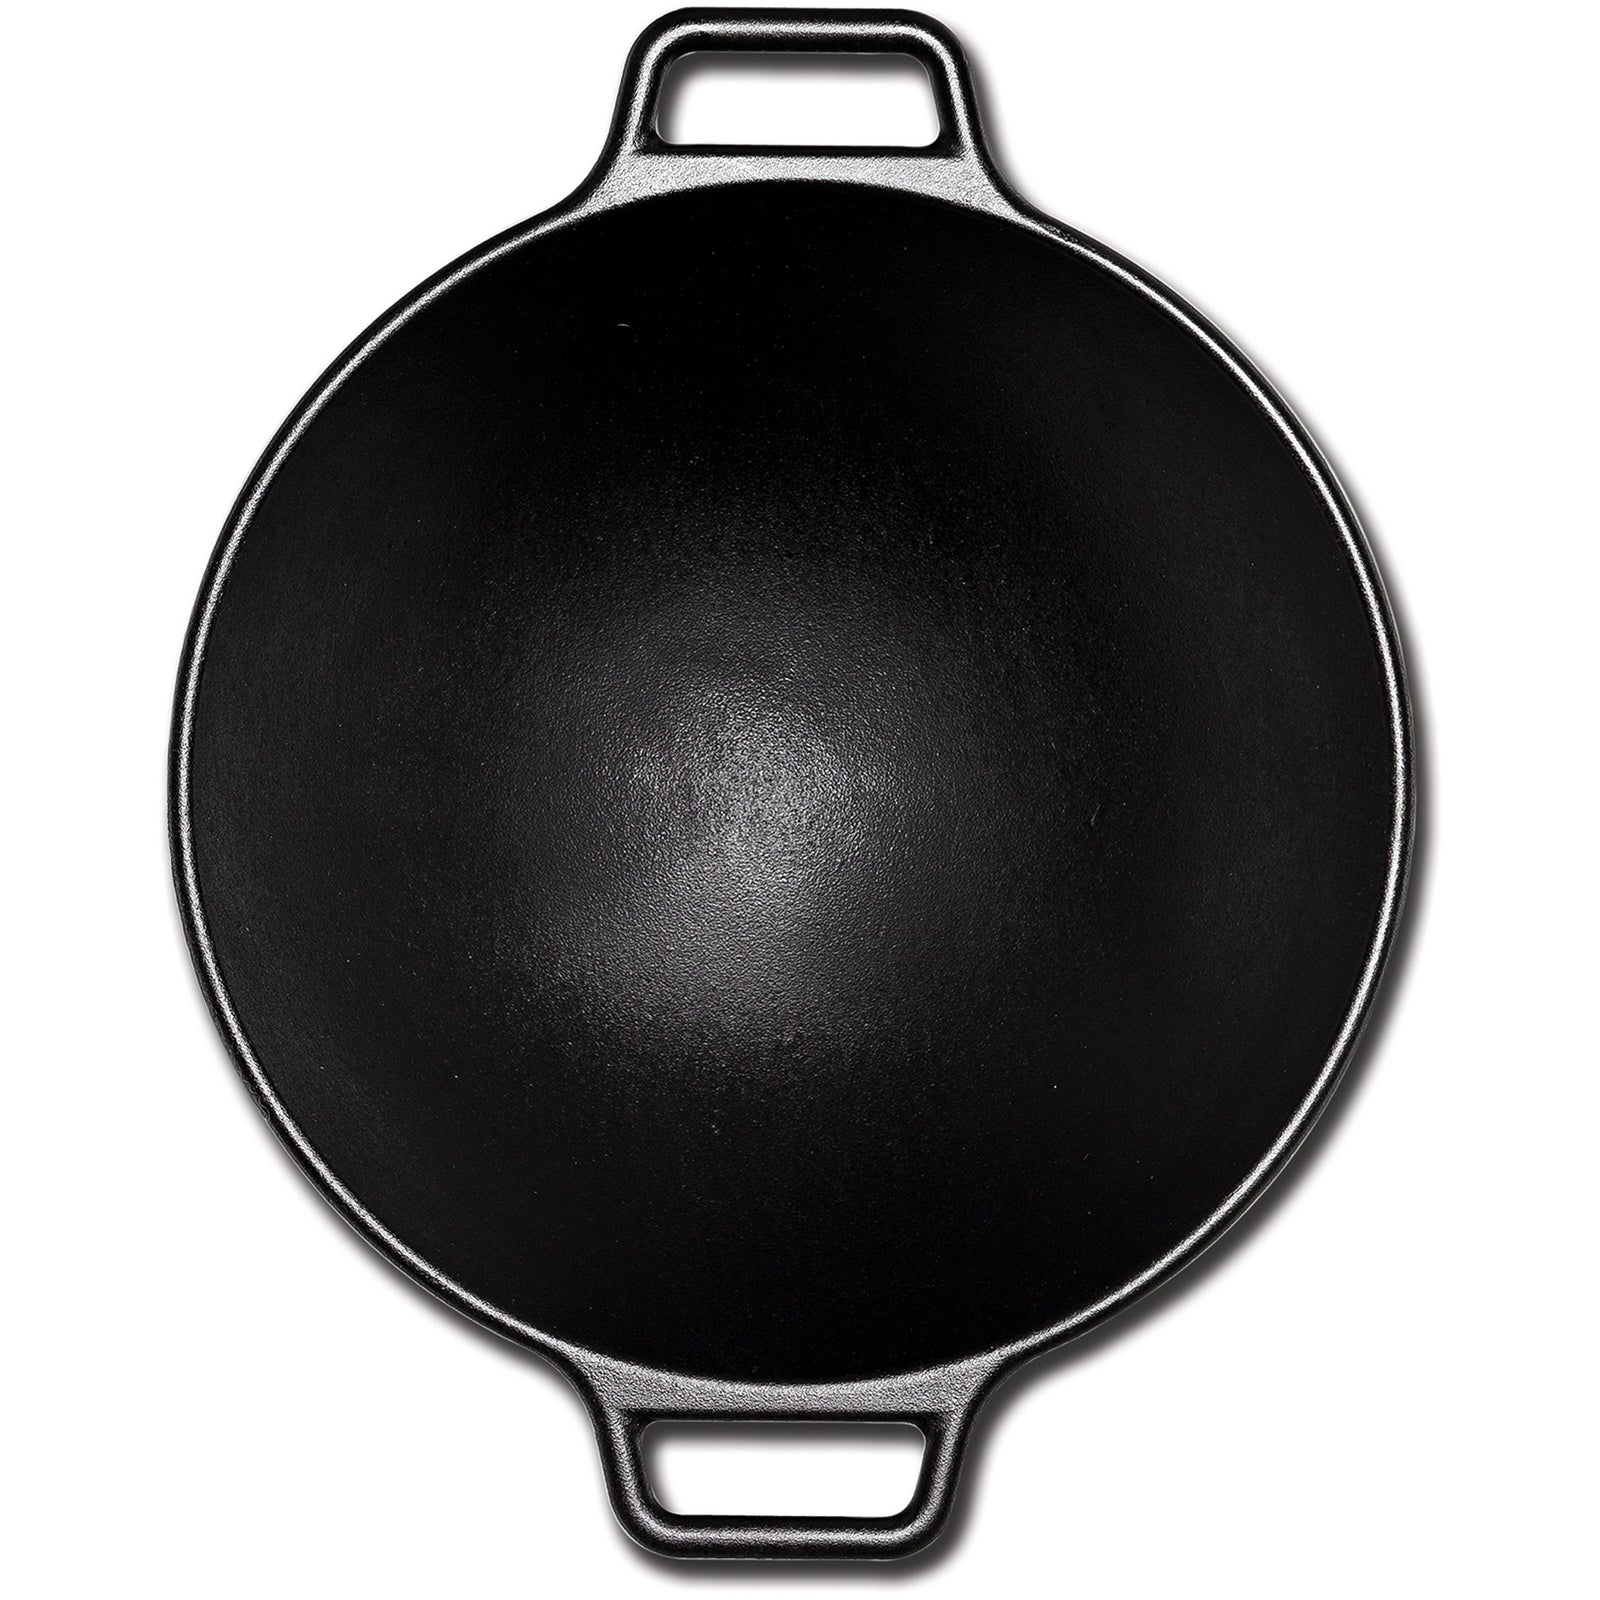 Lodge Cast Iron Wok with Wide Base